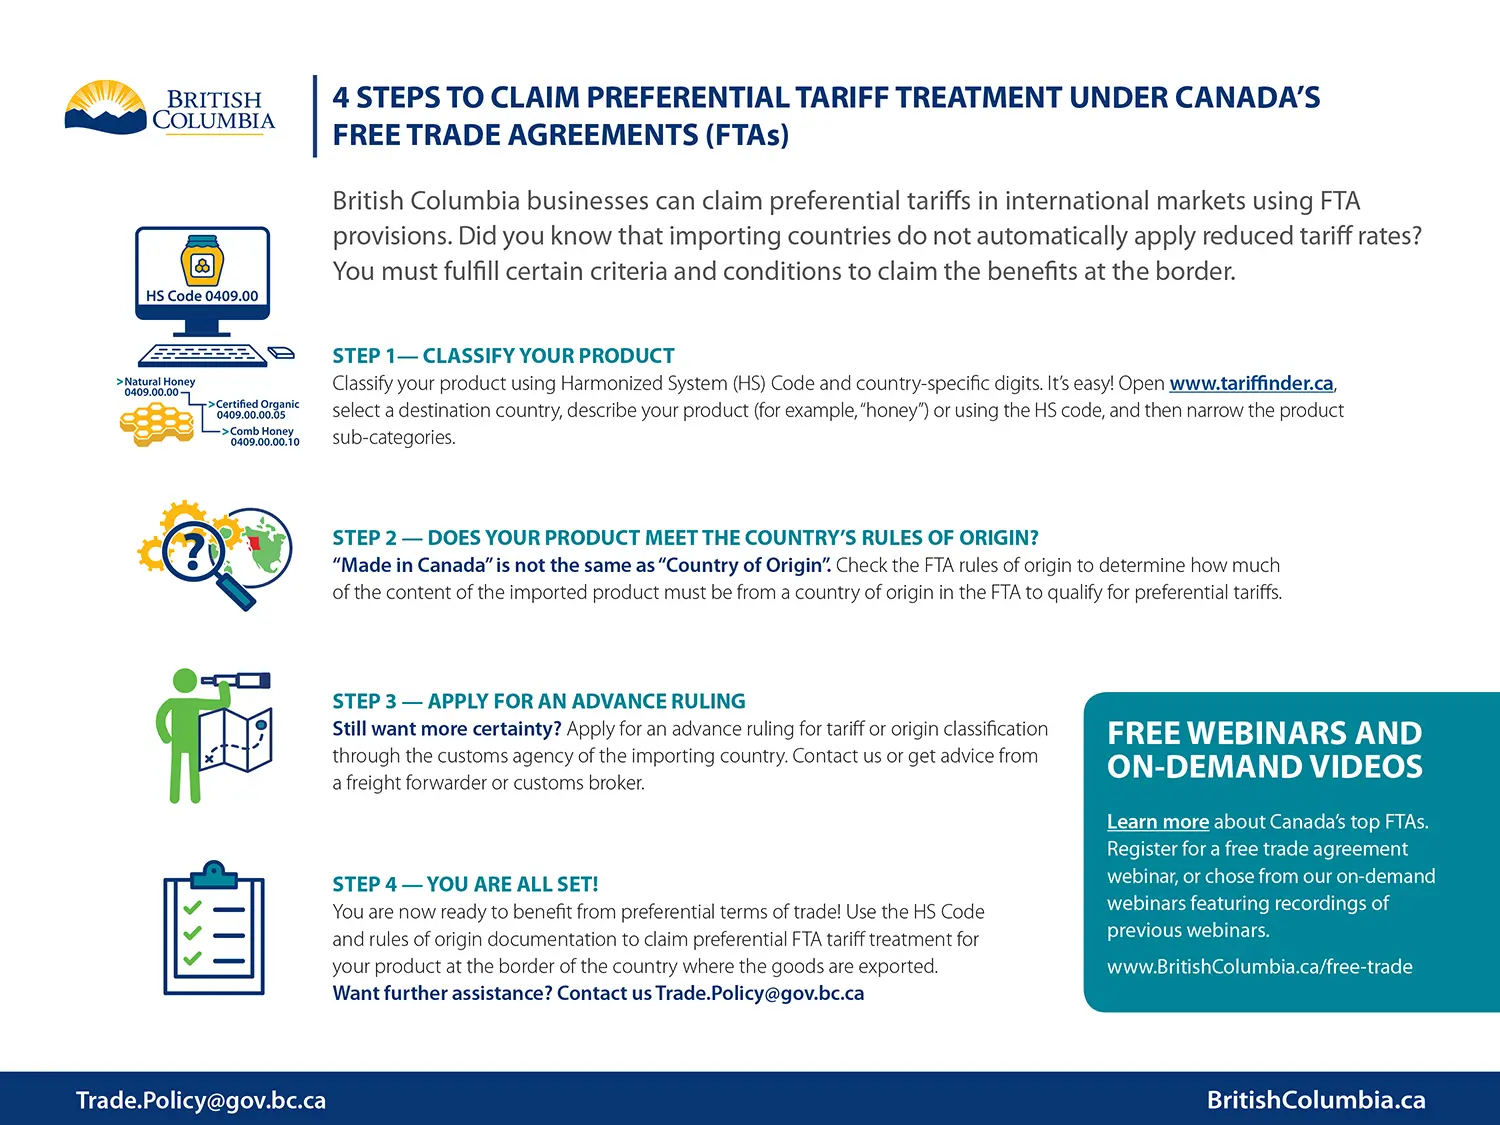 4-STEPS-TO-CLAIM-PREFERENTIAL-TARIFF-TREATMENT-UNDER-CANADA-FREE-TRADE-AGREEMENTS-FTA